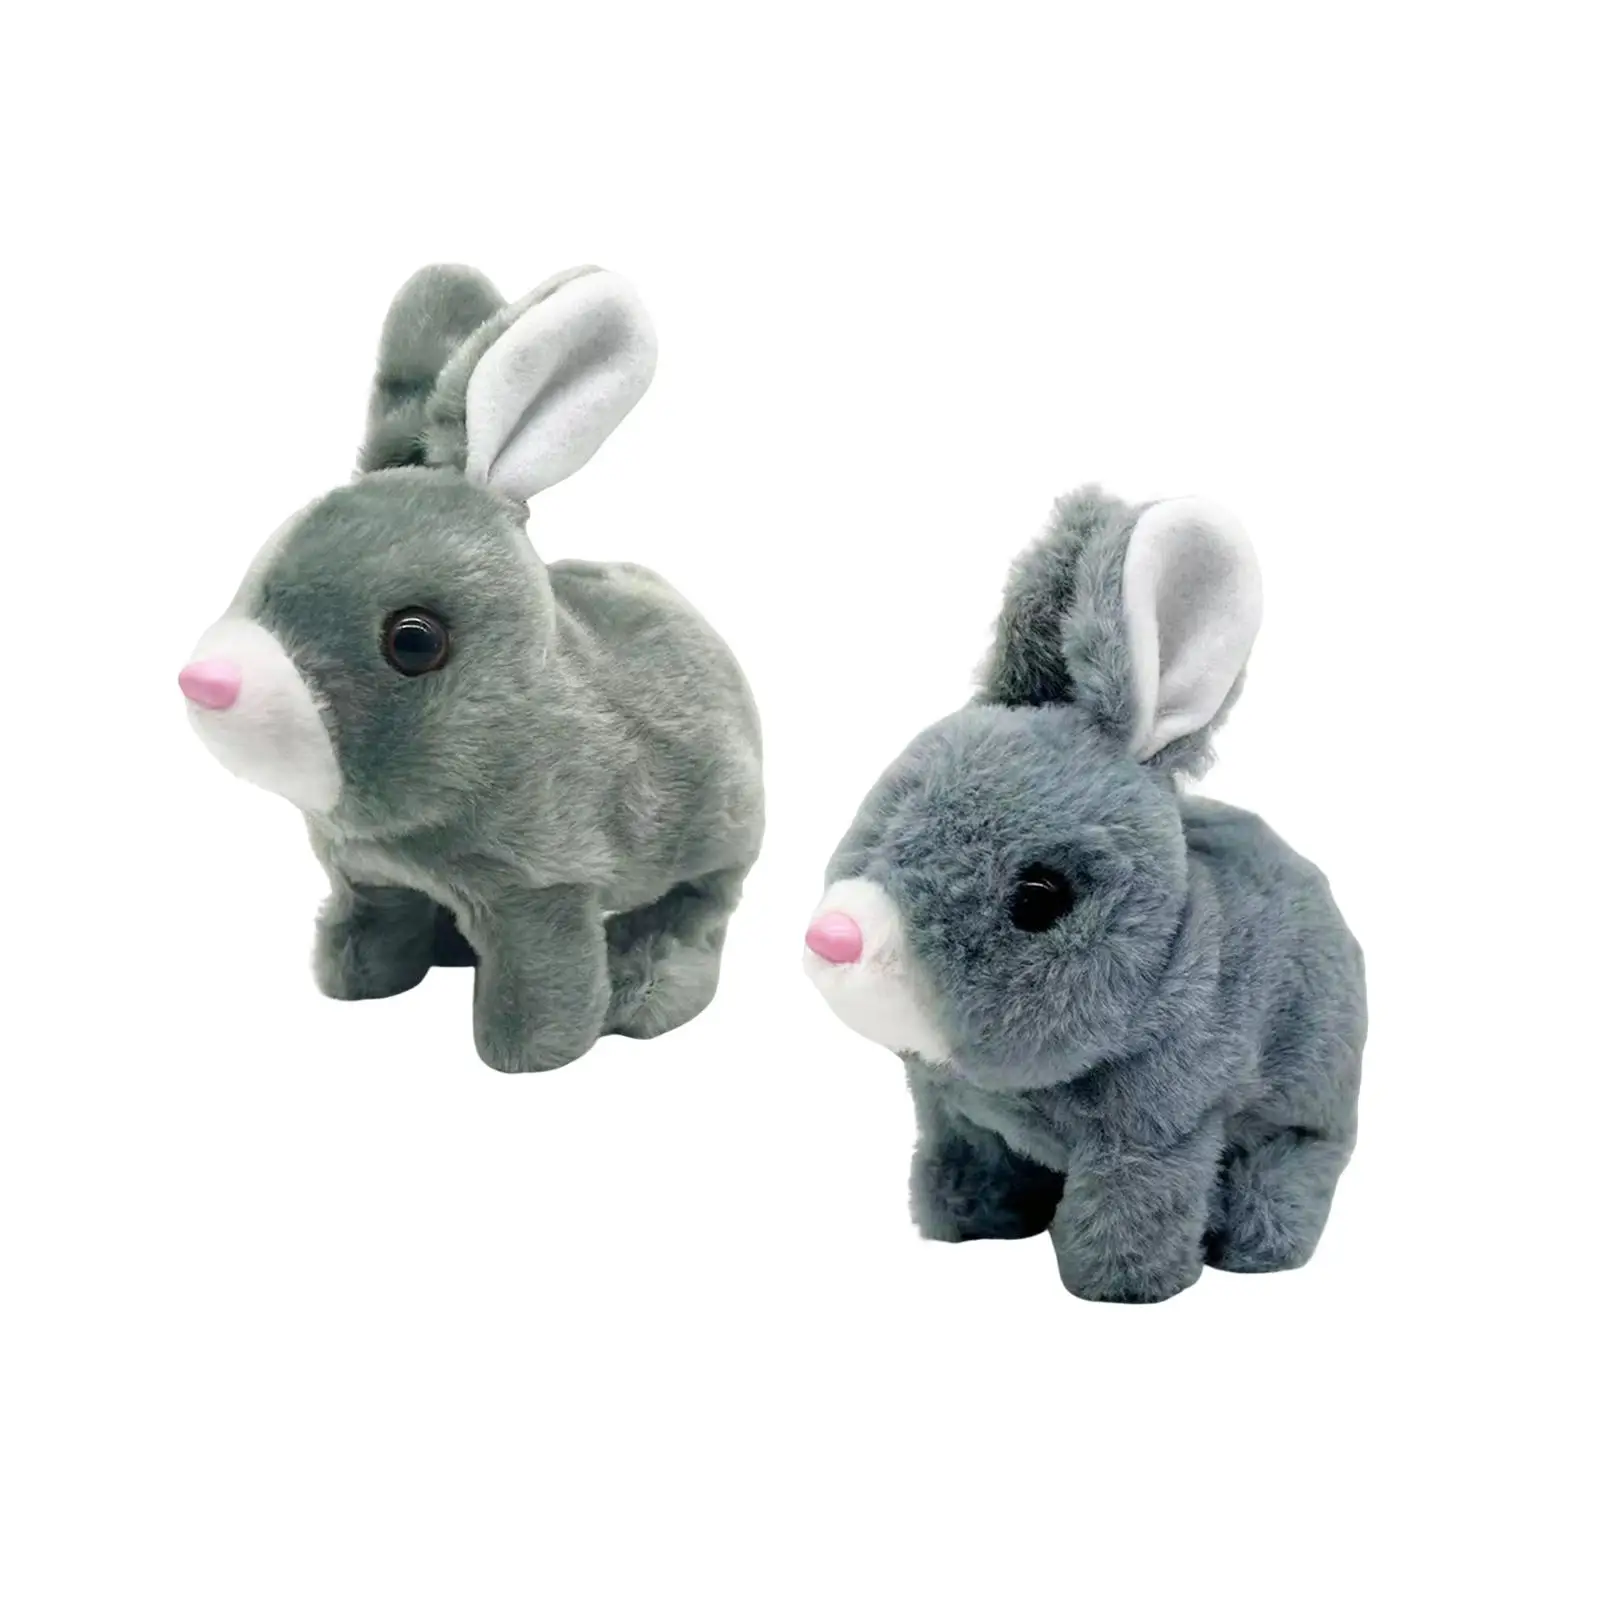 Electric Bunny Toys Wiggling Ears Hopping Jumping Walking for Birthday Gift